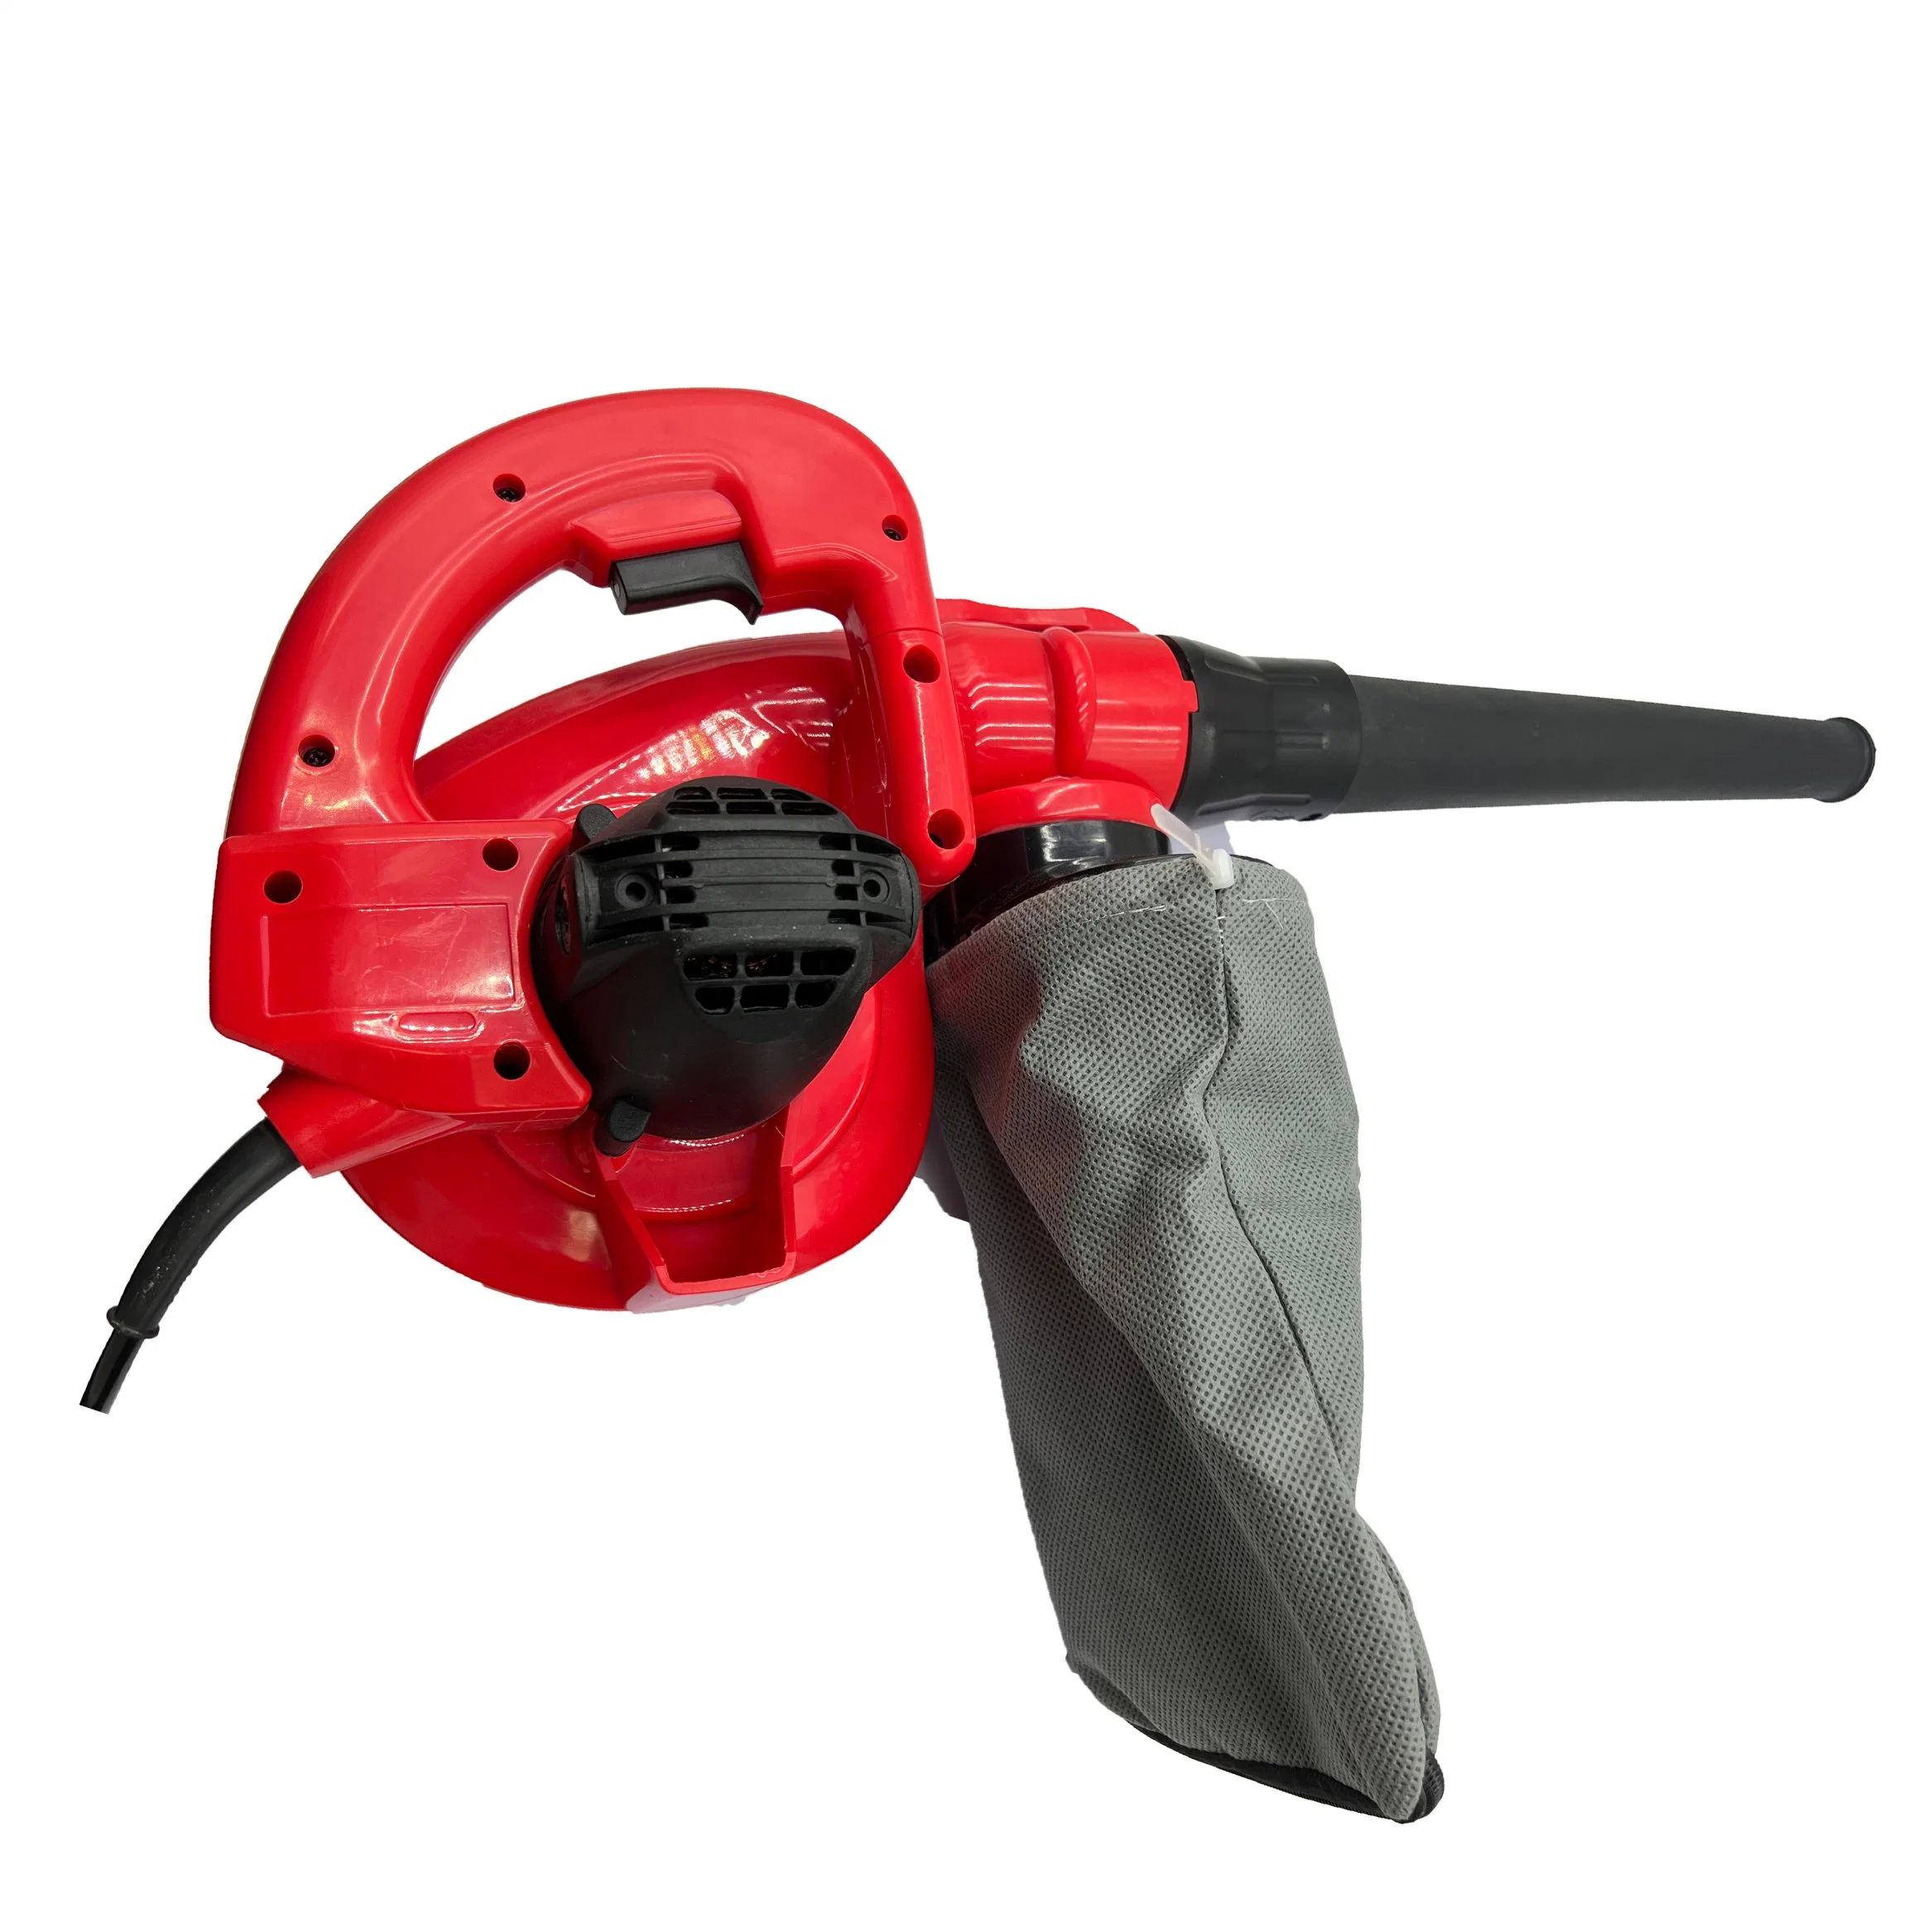 Karin 710W Garden Tools Leaf Corded Blower Electric Blower 220V Power Tool